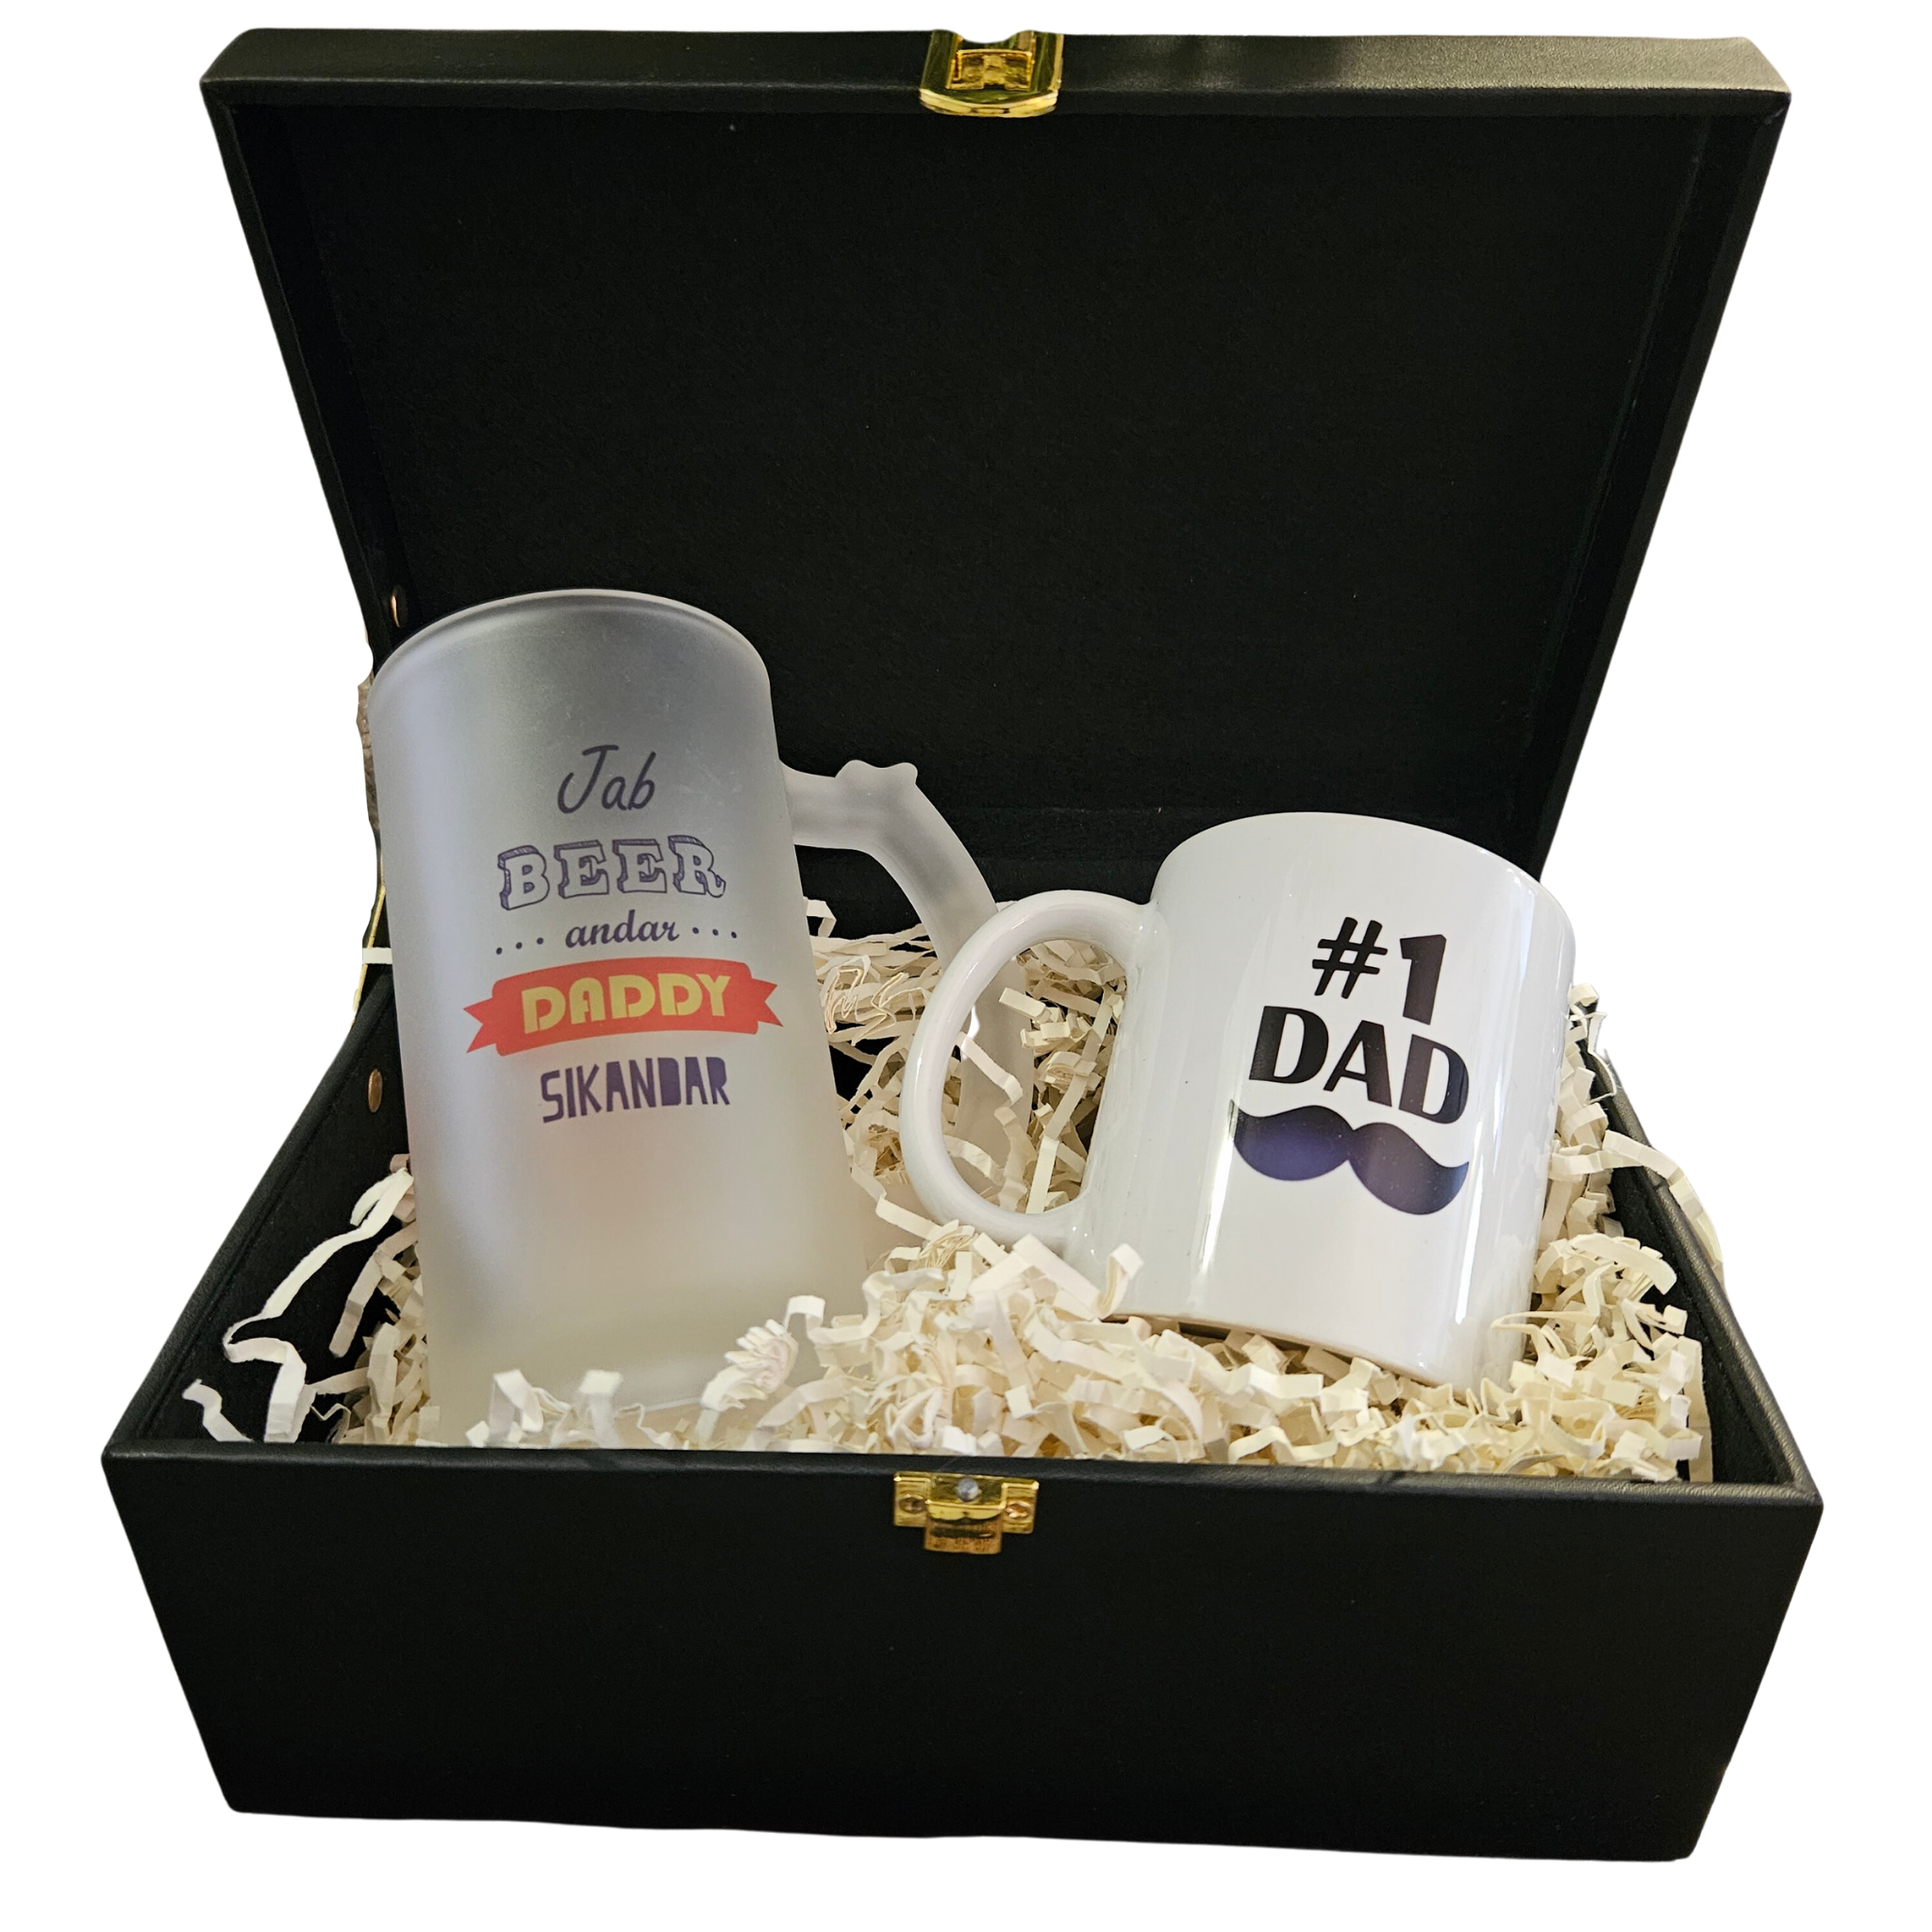 Buy Gifts Bucket Gift for Dad | Fathers Day Gift | Happy Fathers Day Coffee  Mug with Trophy Award Set of 2 | Fathers Day Special Online at Low Prices  in India - Amazon.in